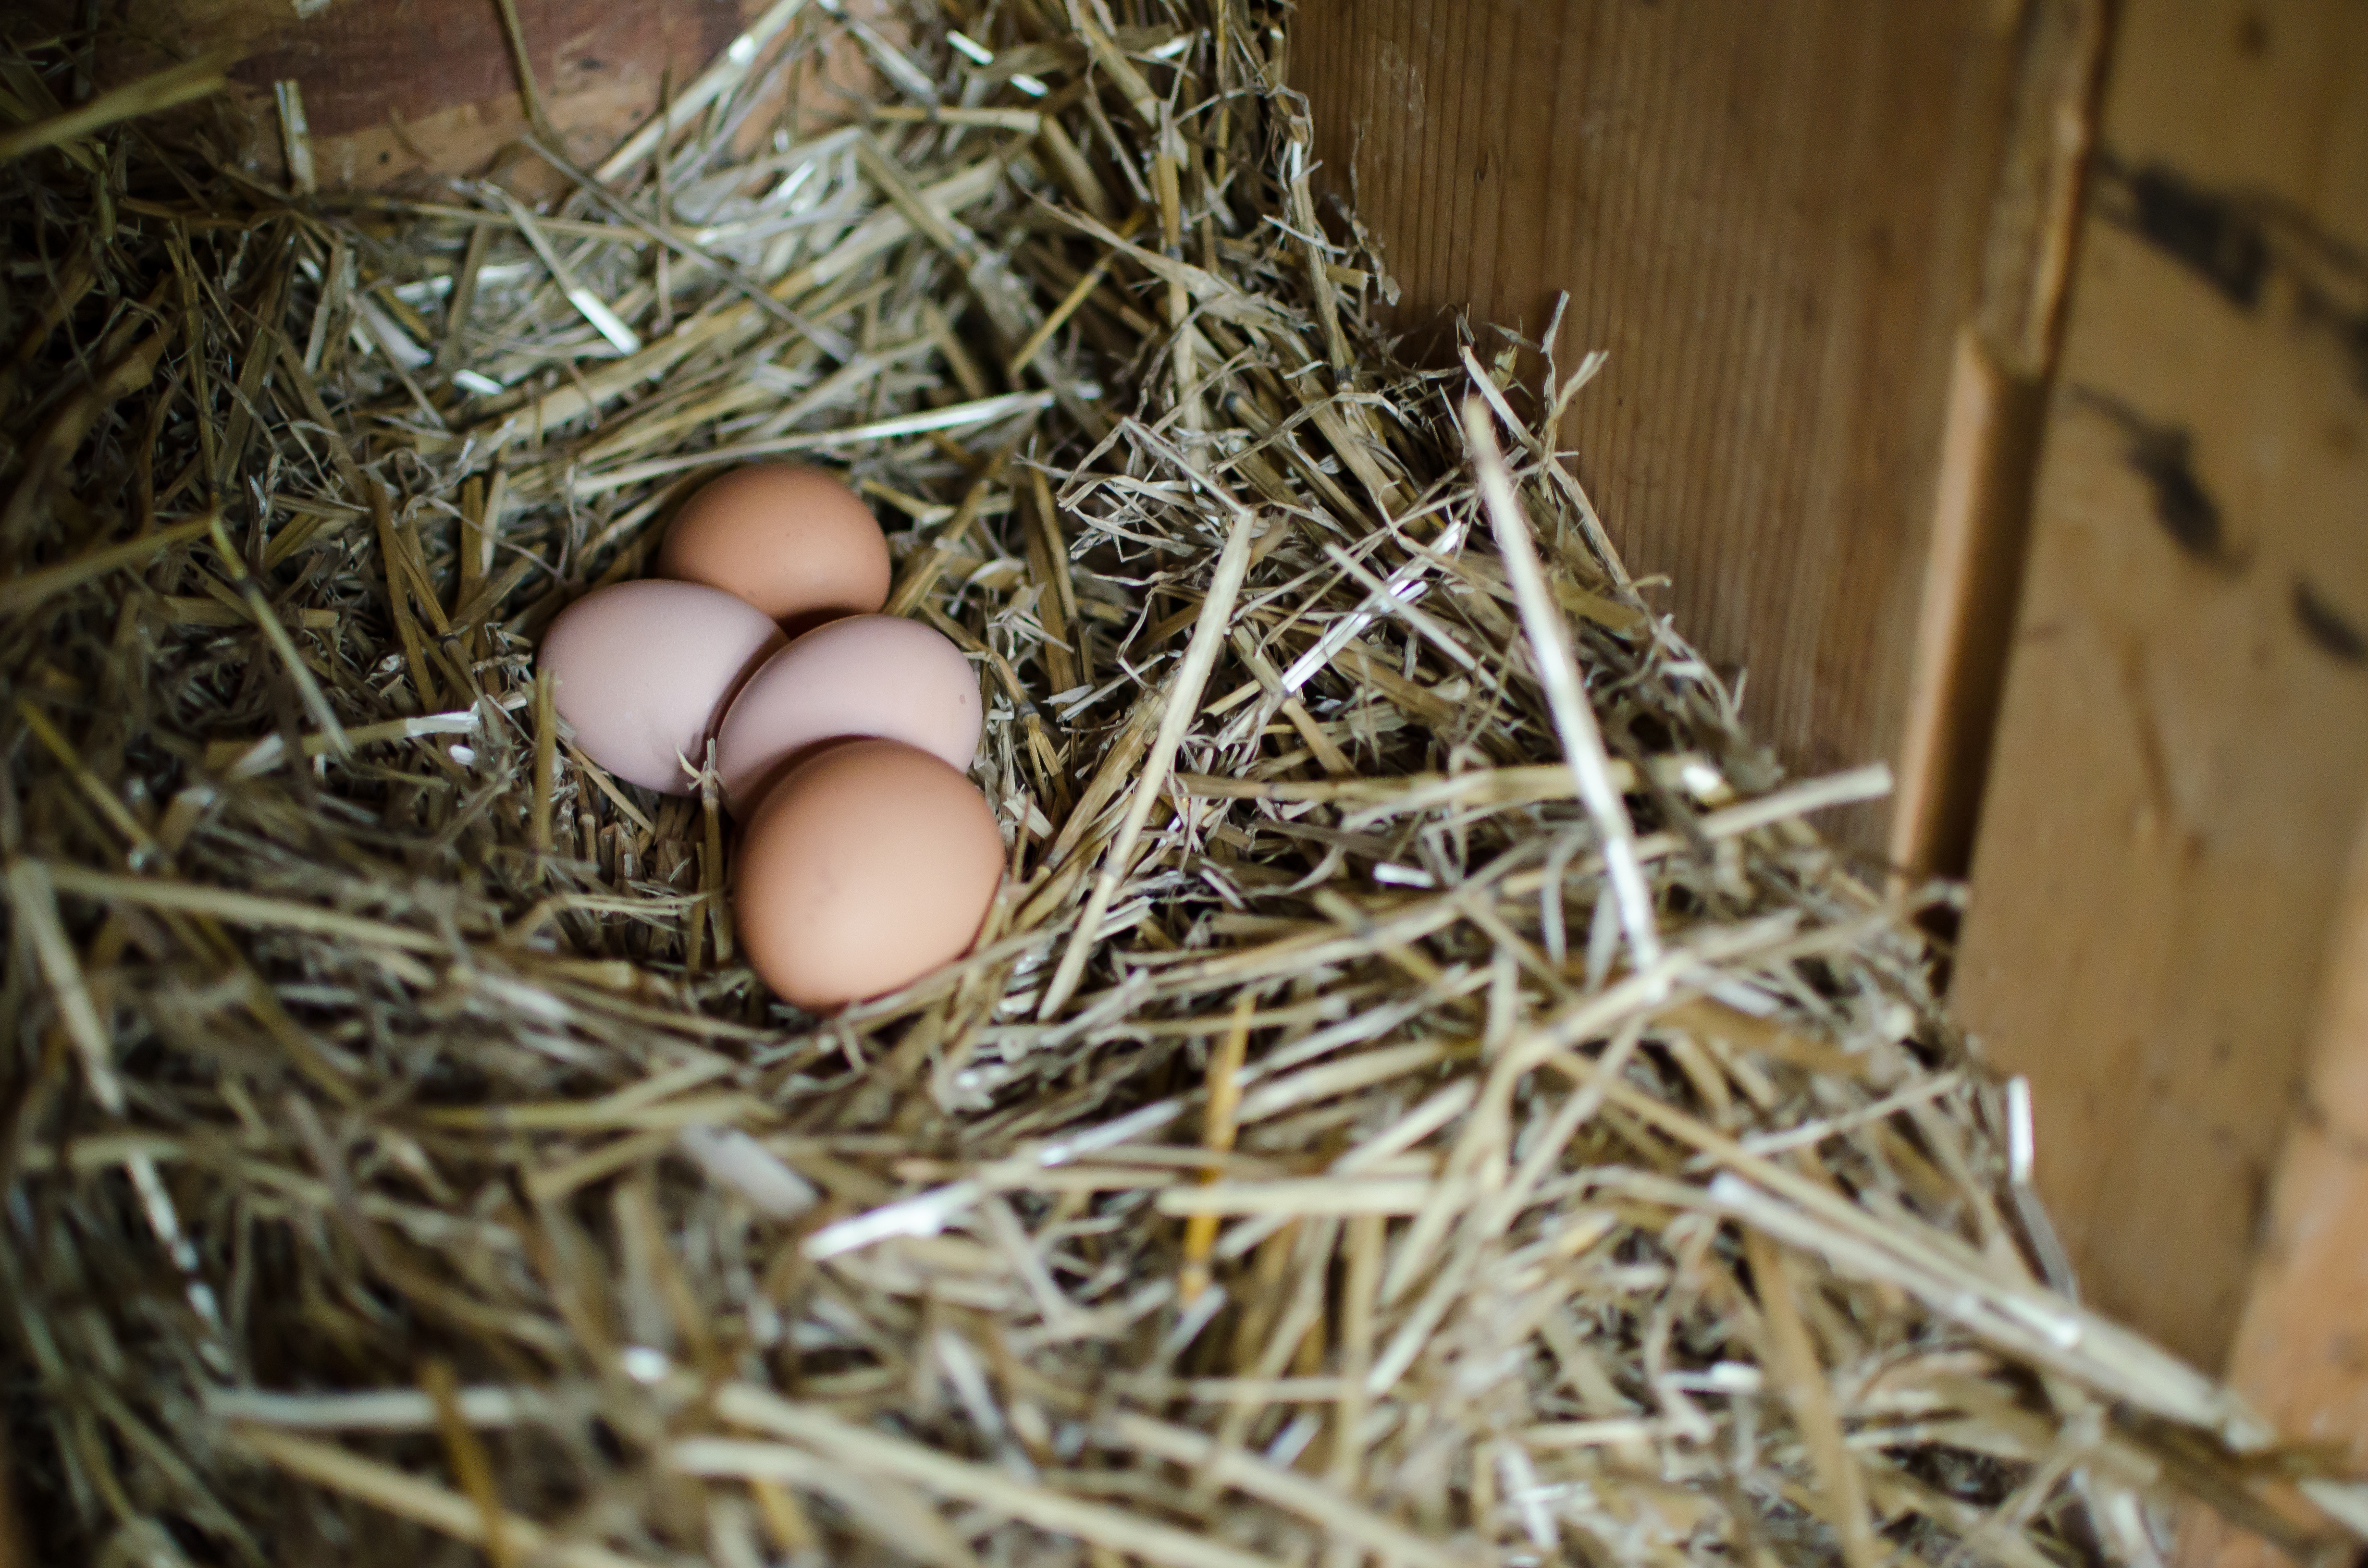 How to clean and prepare eggs for incubation